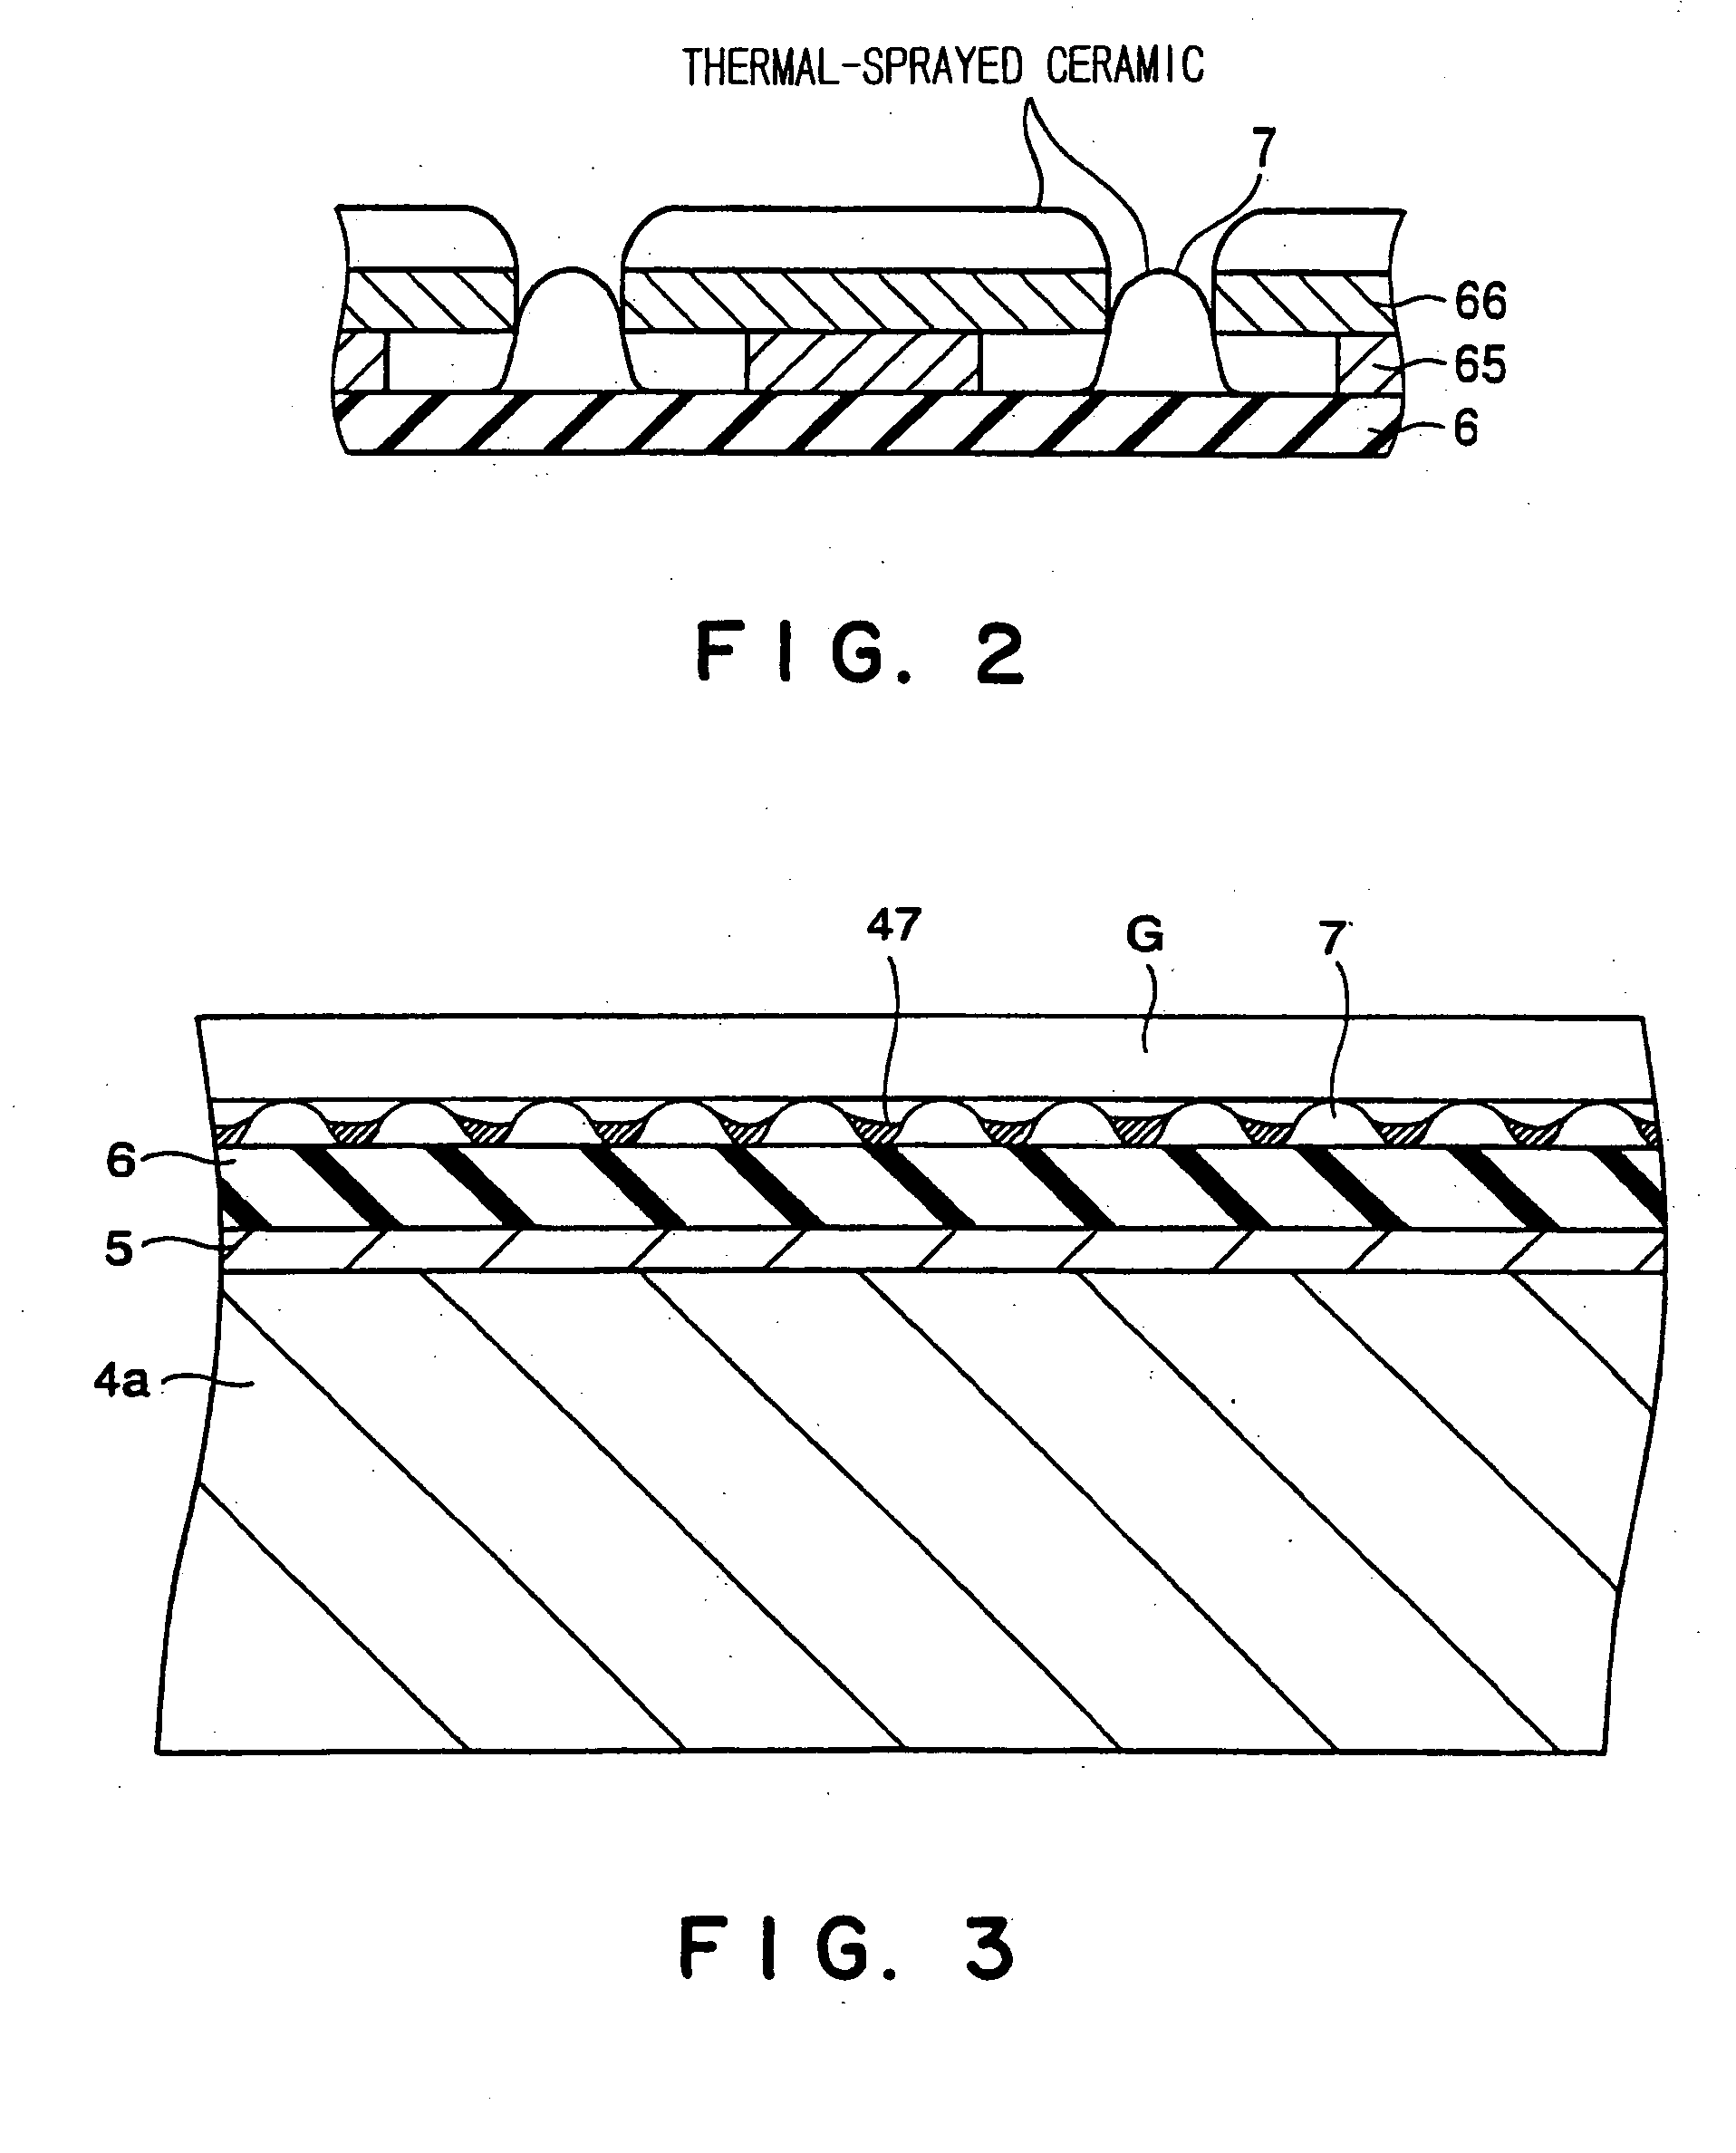 Substrate supporting table, method for producing same, and processing system